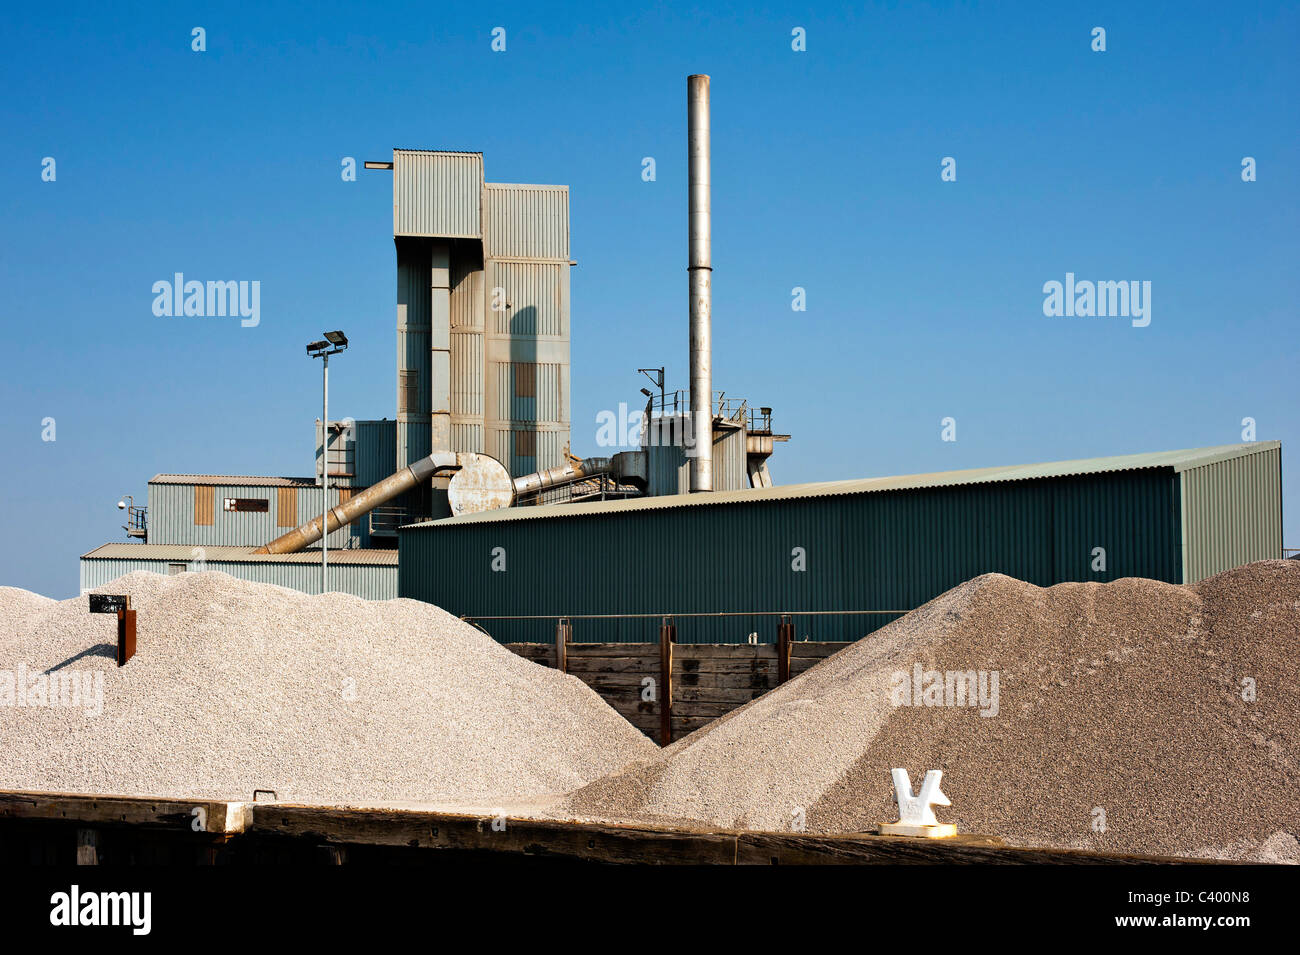 WHITSTABLE, KENT, UK - APRIL 30, 2011:  Brett Aggregates plant on the East Quay  at the Harbour Stock Photo